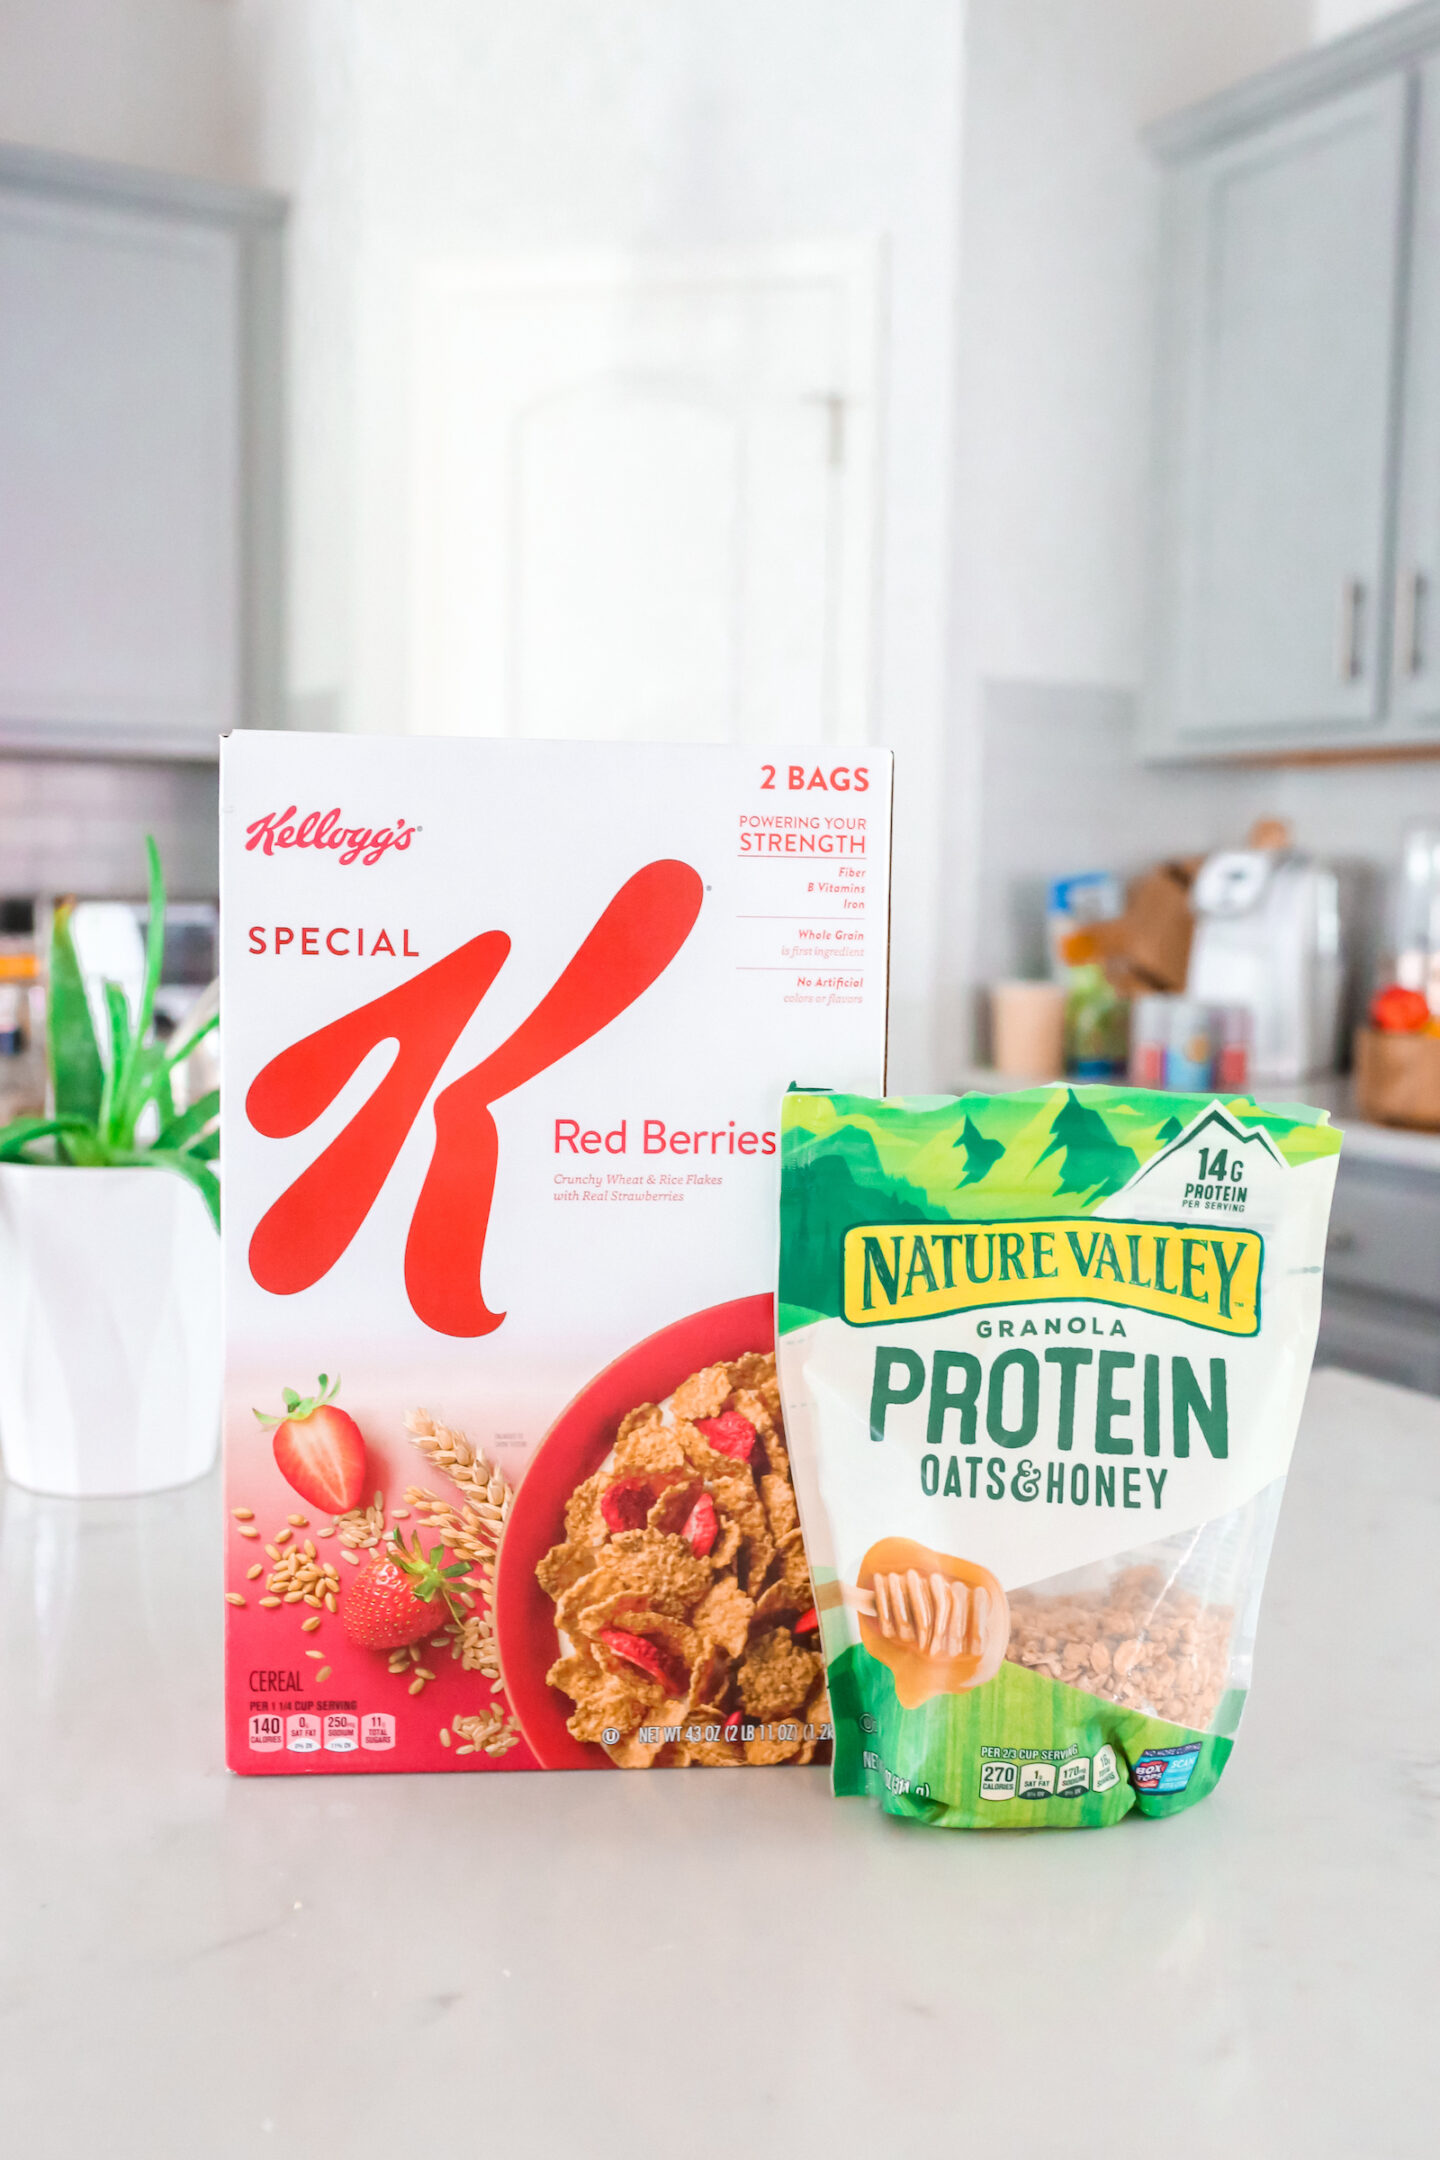 Special K Protein Cereal